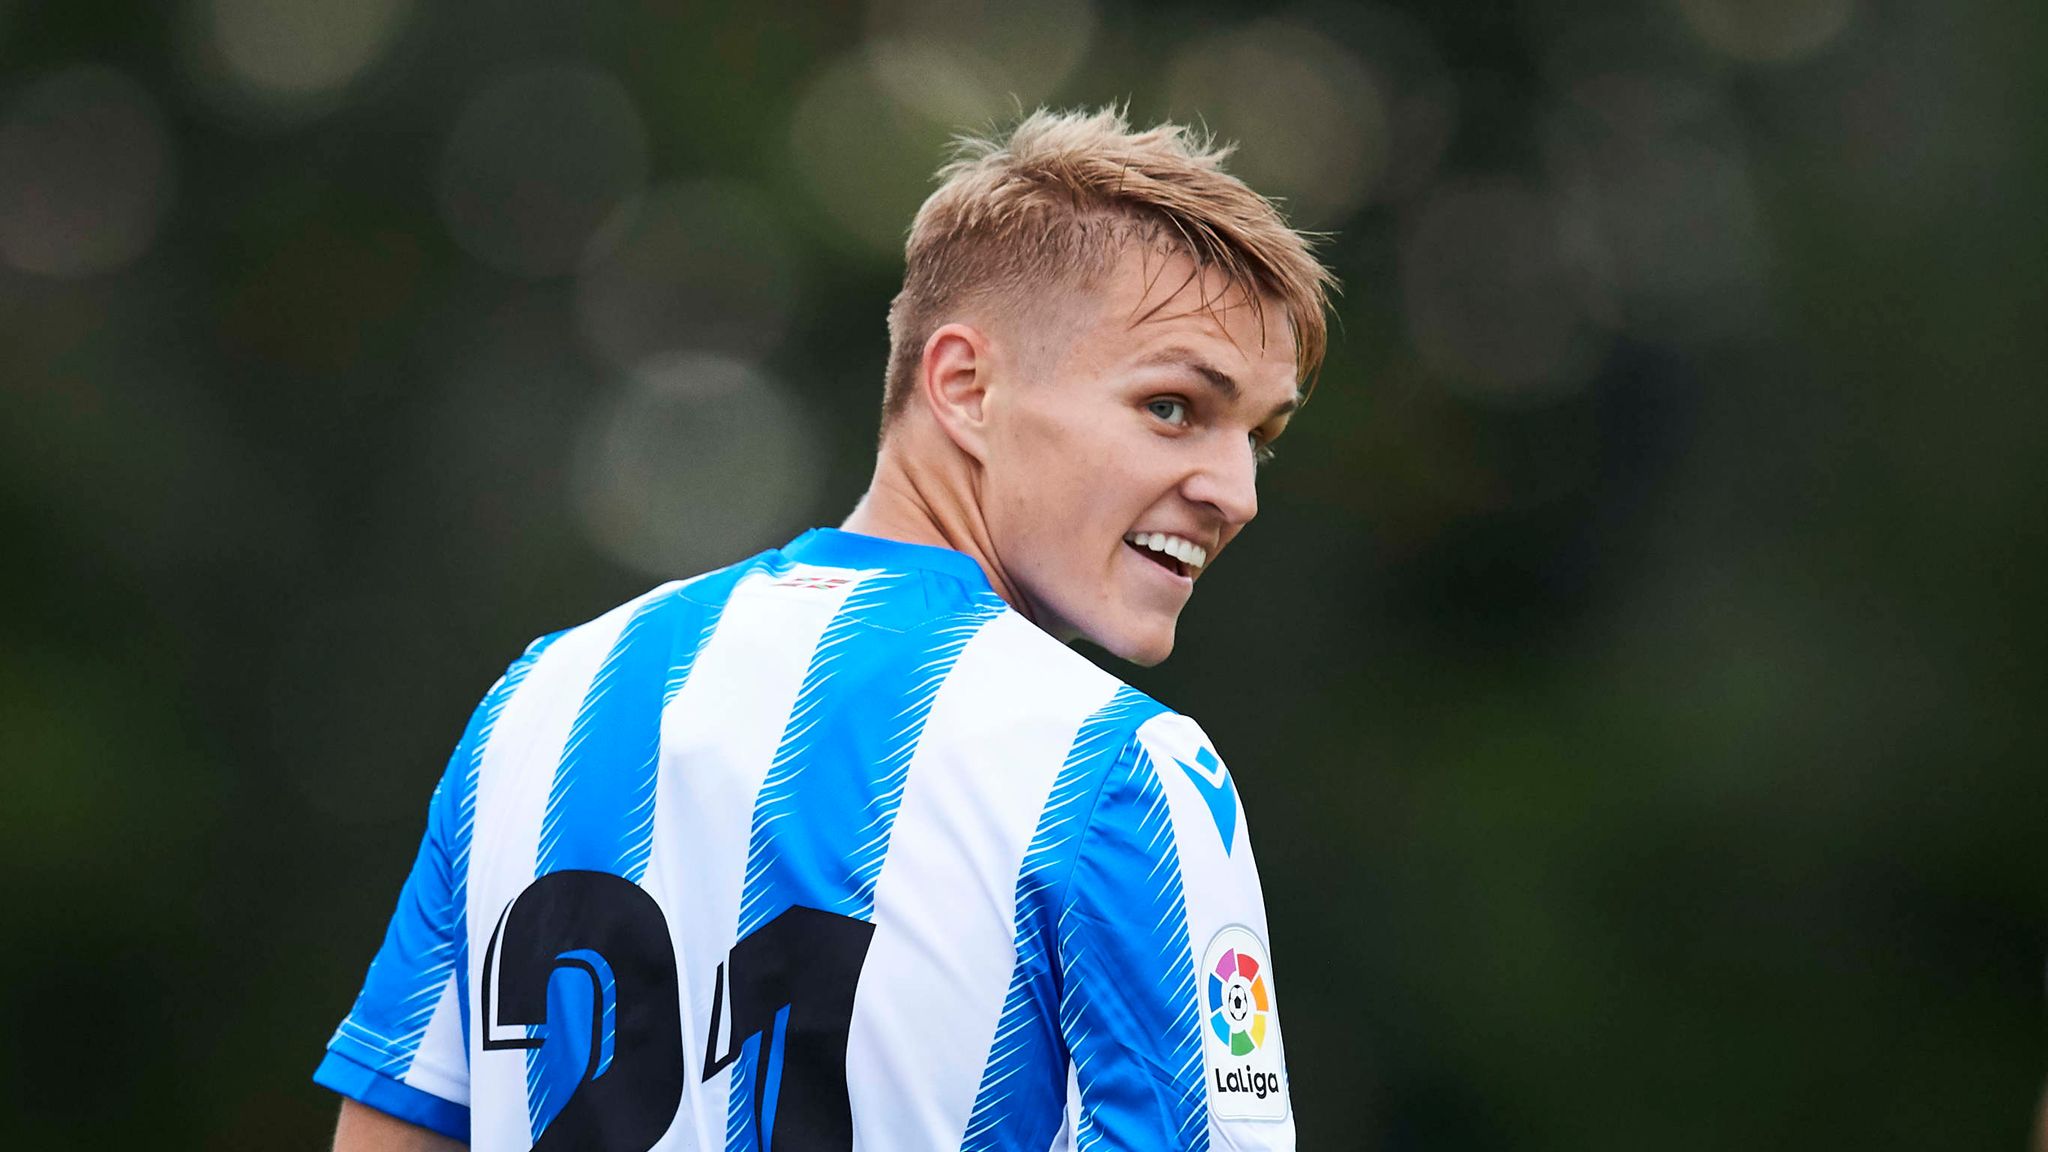 Transfer talk: Arsenal set to sign Martin Odegaard on loan from Real